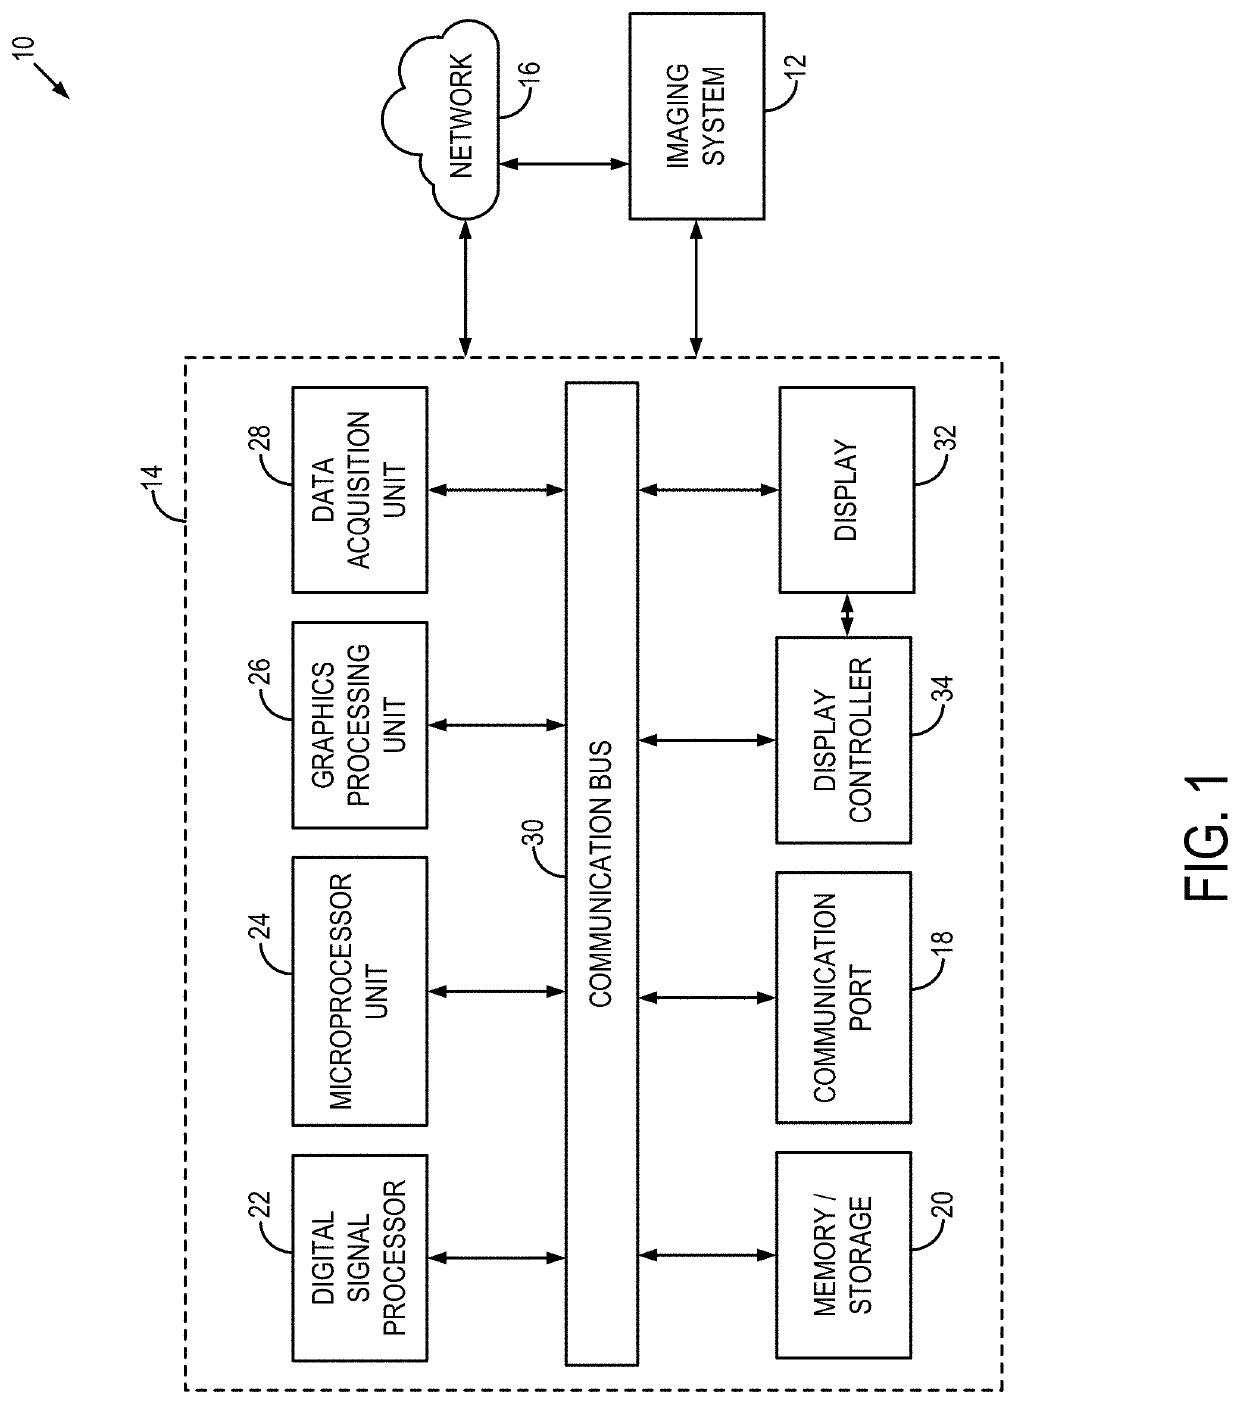 Systems and methods for enhanced diagnosis of transthyretin cardiac amyloidosis